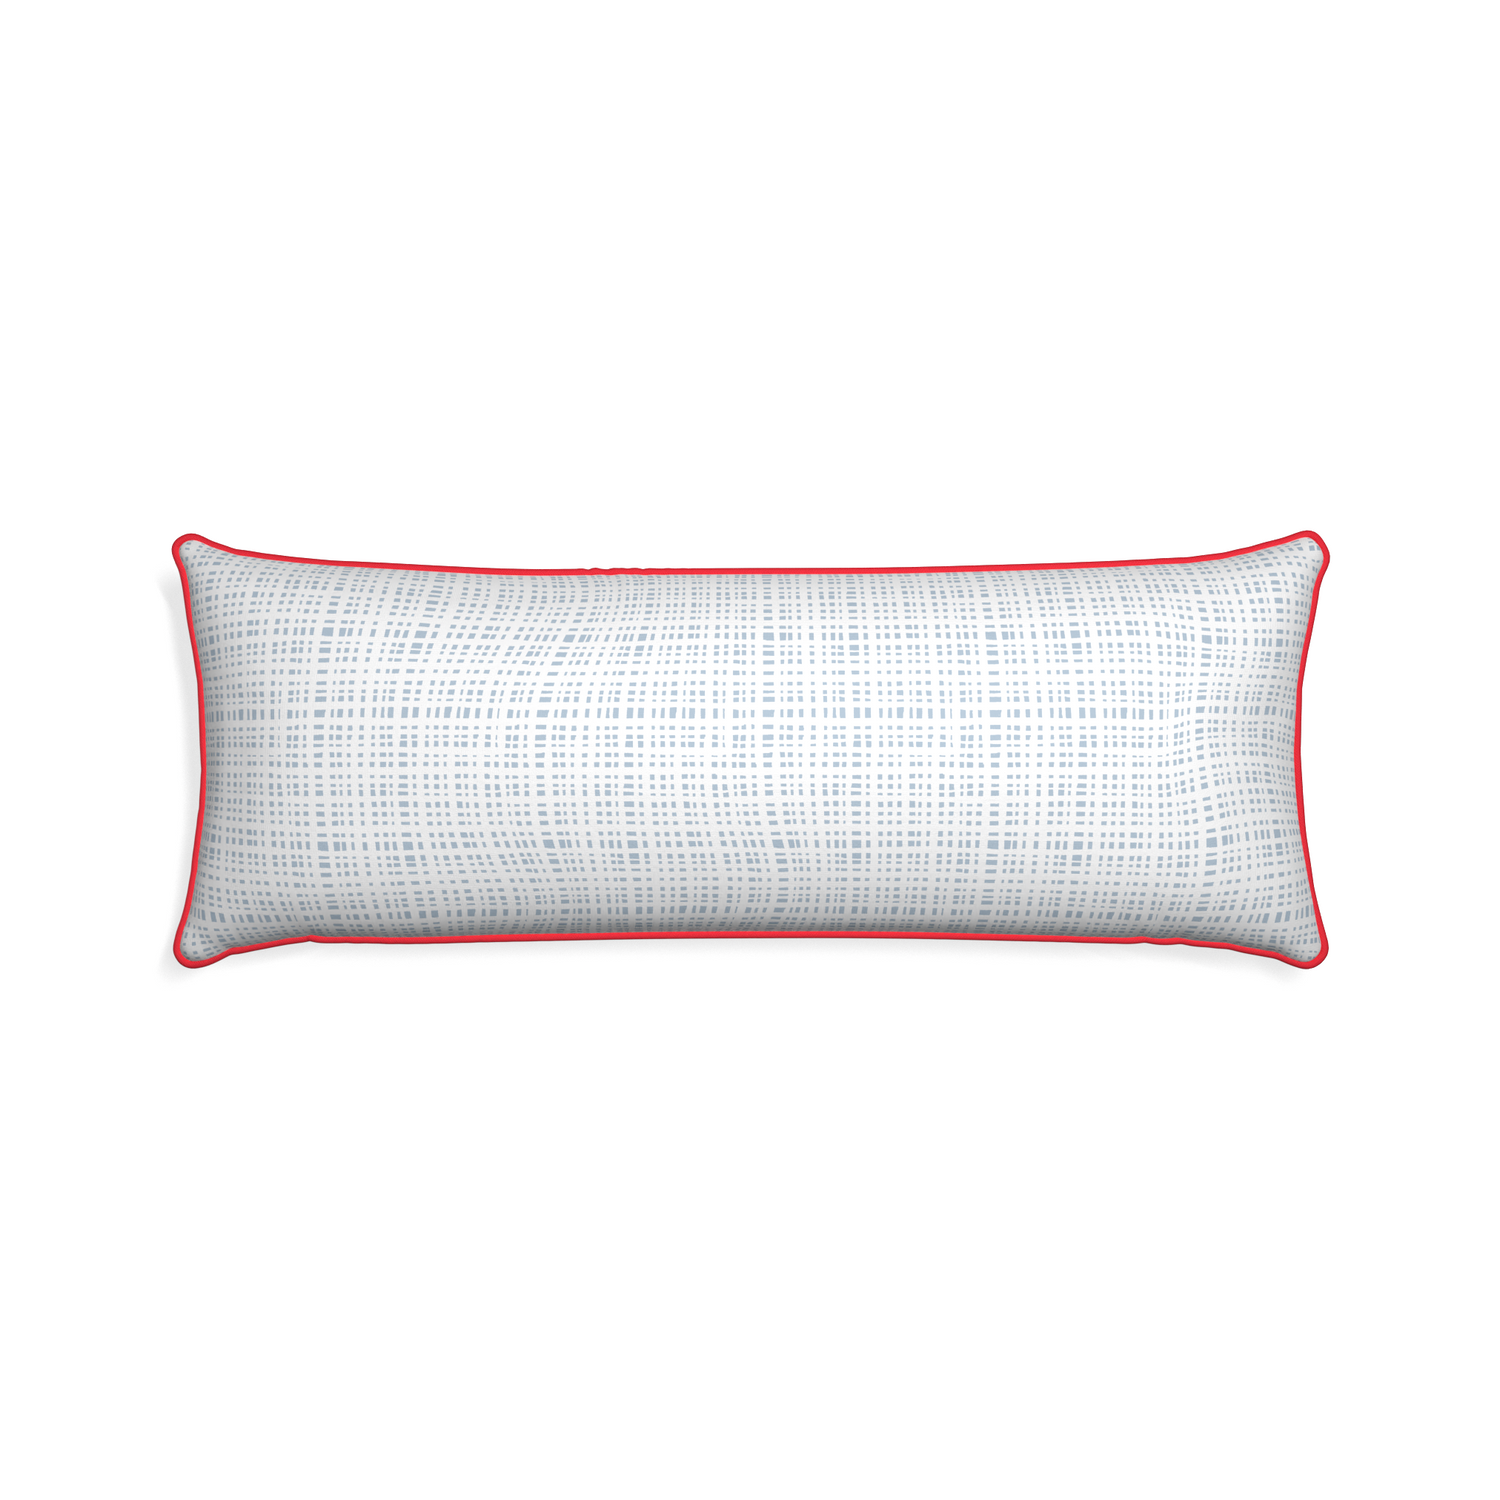 Xl-lumbar ginger custom plaid sky bluepillow with cherry piping on white background